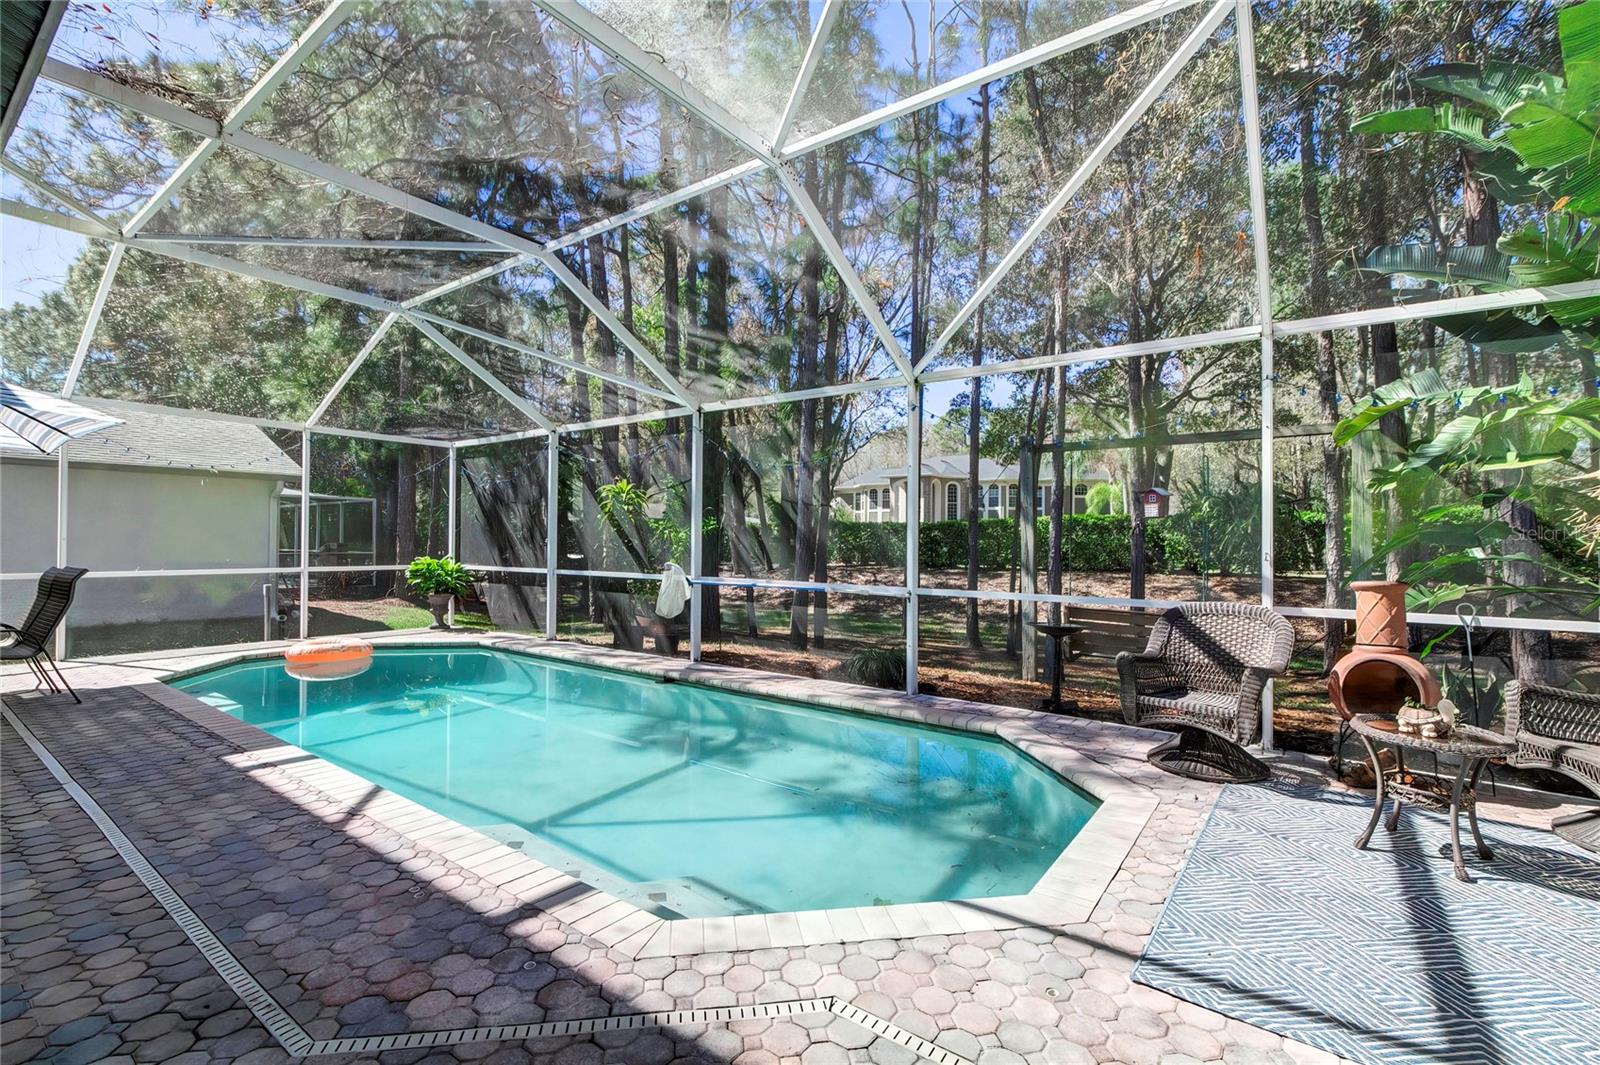 Caged Pool with Brick Pavers